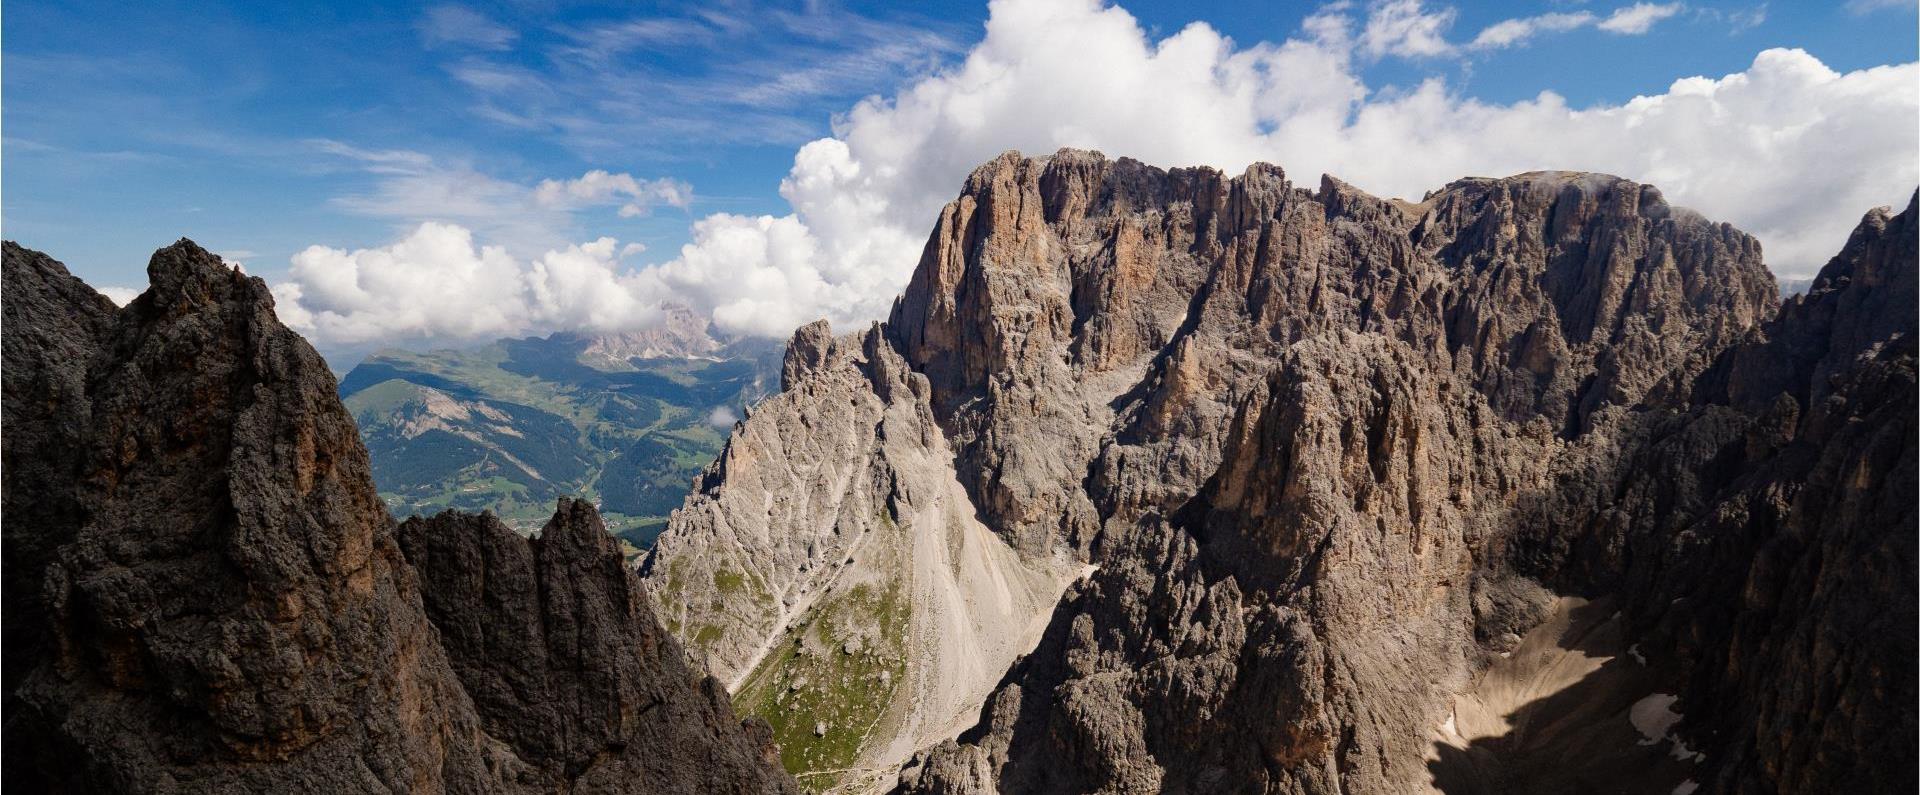 the dolomite mountains in Italy: Panoramic view